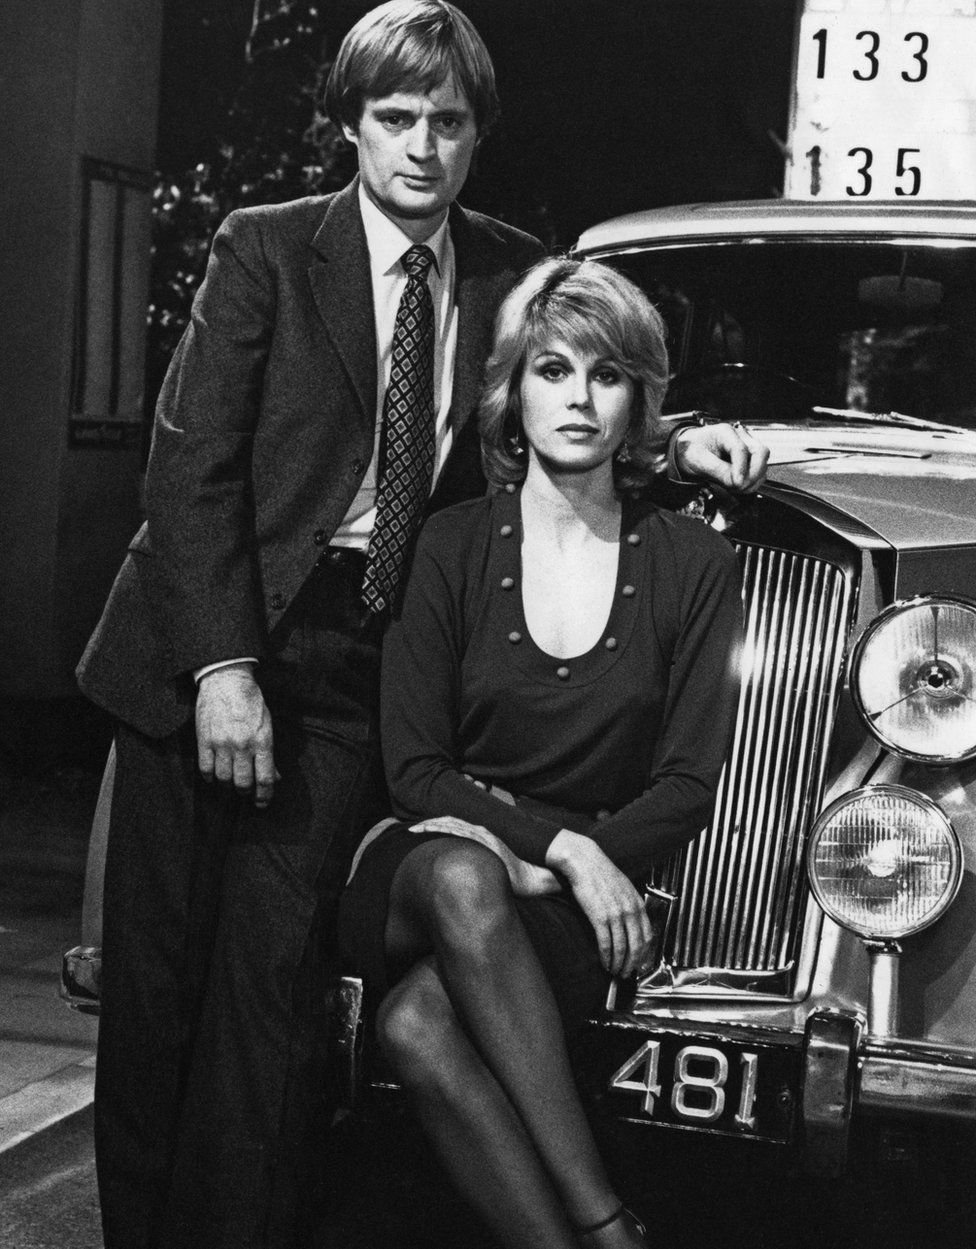 David McCallum and Joanna Lumley in the mysterious Sapphire & Steel